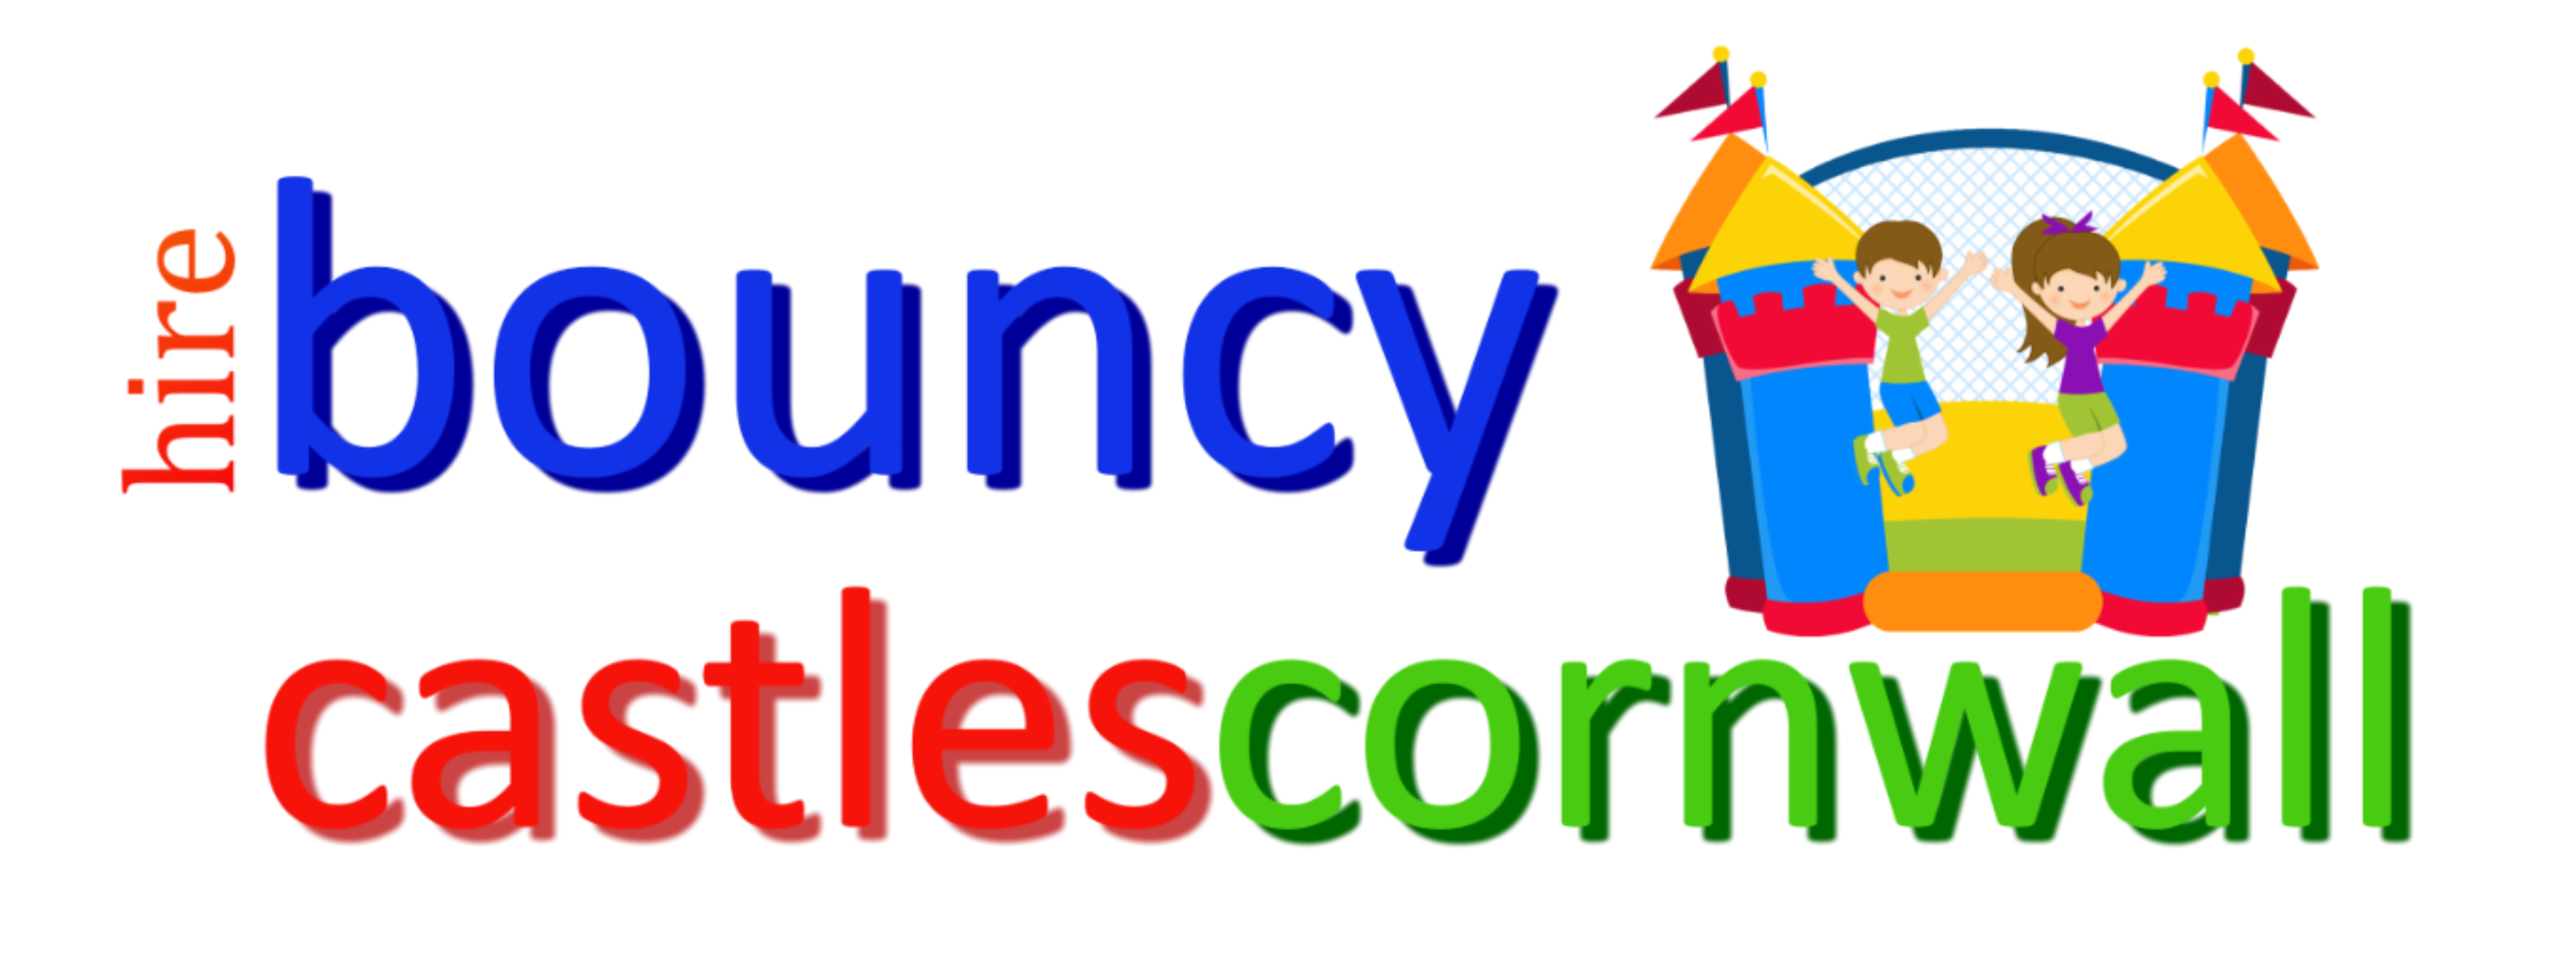 Colourful logo with bouncy castle a boy and a girl